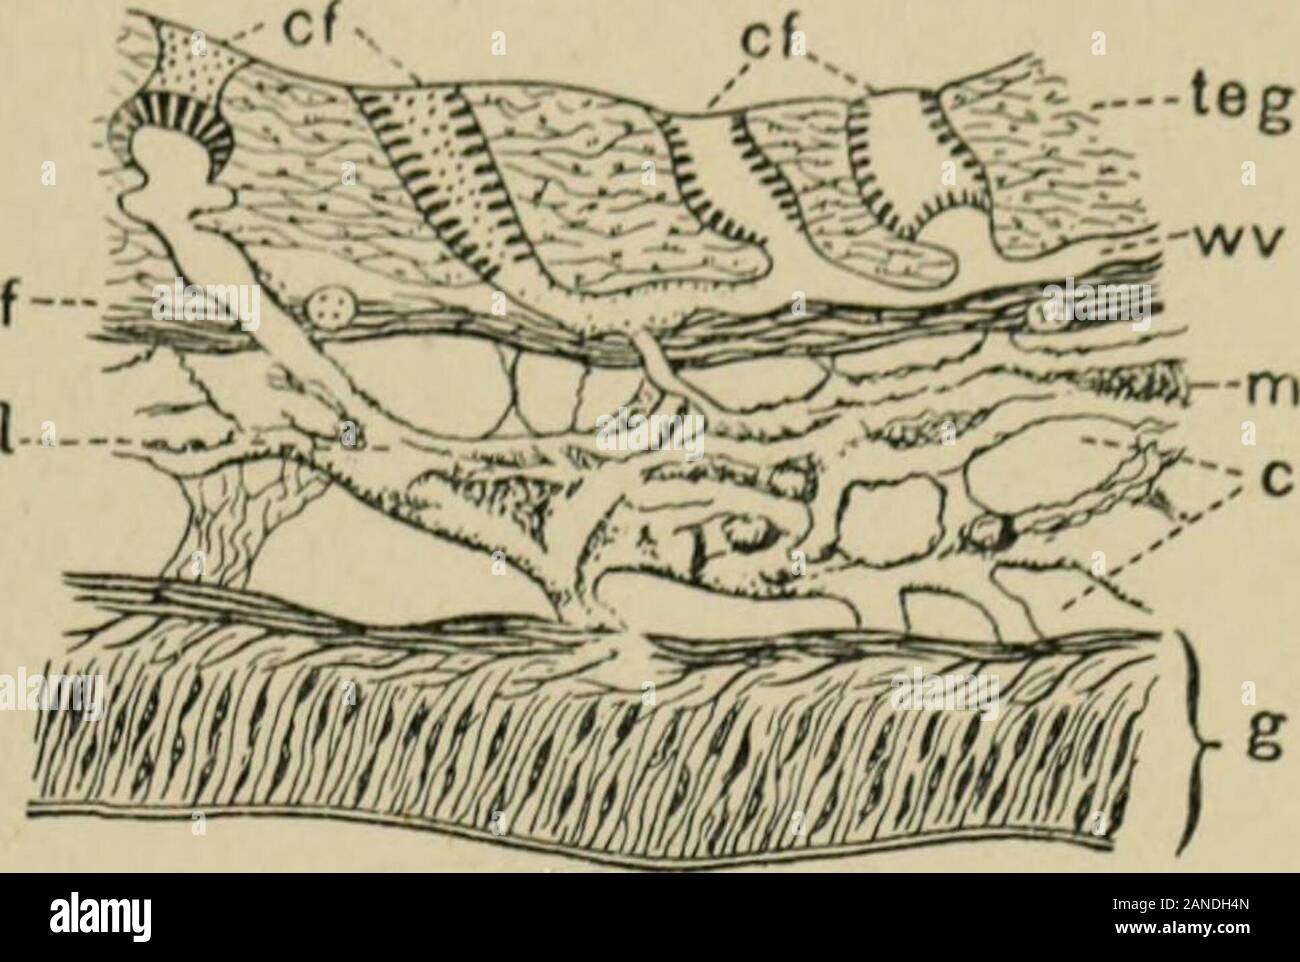 A treatise on zoology . Fin. XLVI. Ventral surface of Antedon hifido,diagrammatised from various authori-ties. X 4 diain. As, anus ; 0, mouth ;p, pinnules; s, sacenli; ?(•.;), water-pores. Fig. XLVH. ^?trtical section througli tegmen and under-lying structures of Antedon bifida. Hhows fourpores, with ciliated funnels (c/), piercing theintegument (teg), and communicating by awater-vessel (?(;r) with lacunar vessels (/) in theconnective tissue; of the mesentery (m). Tliefunnels are cut through in different directions./, fibrous layer of integument; c, coelomiccavities ; ij, gut-wall, showing out Stock Photo